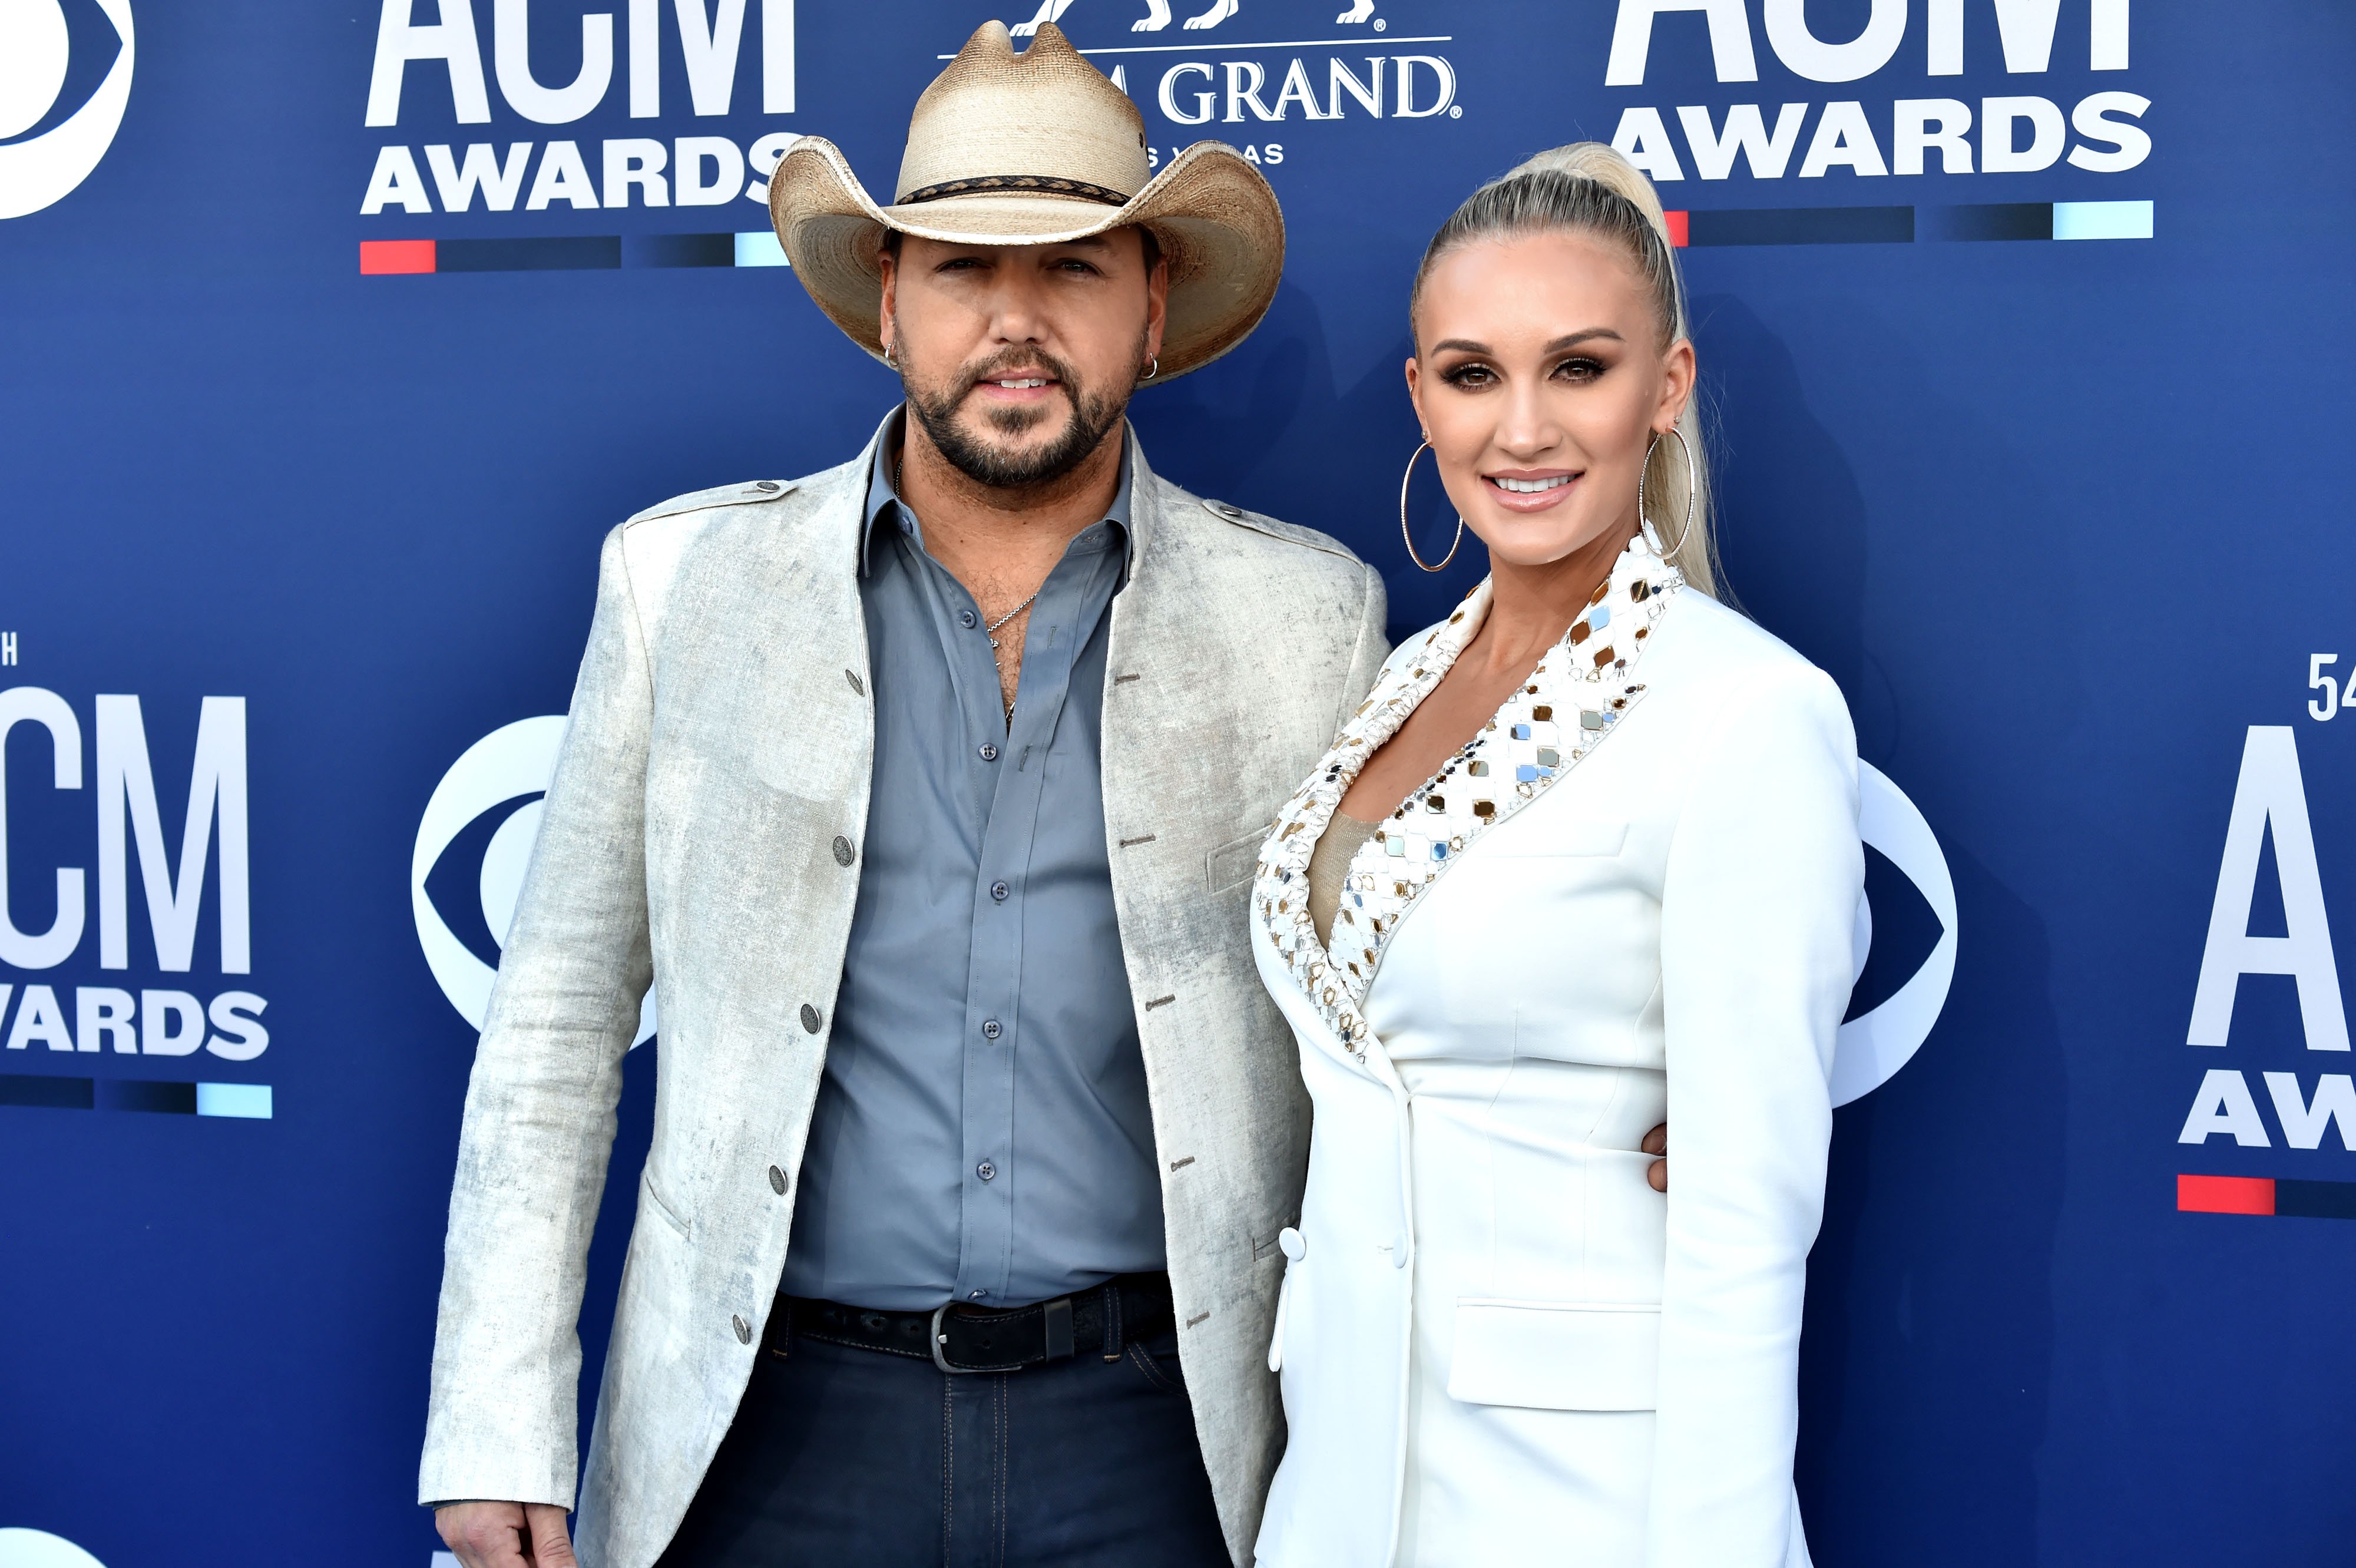 Jason Aldean and Brittany Kerr attending the American Country Music Awards. Source | Photo: Getty Images